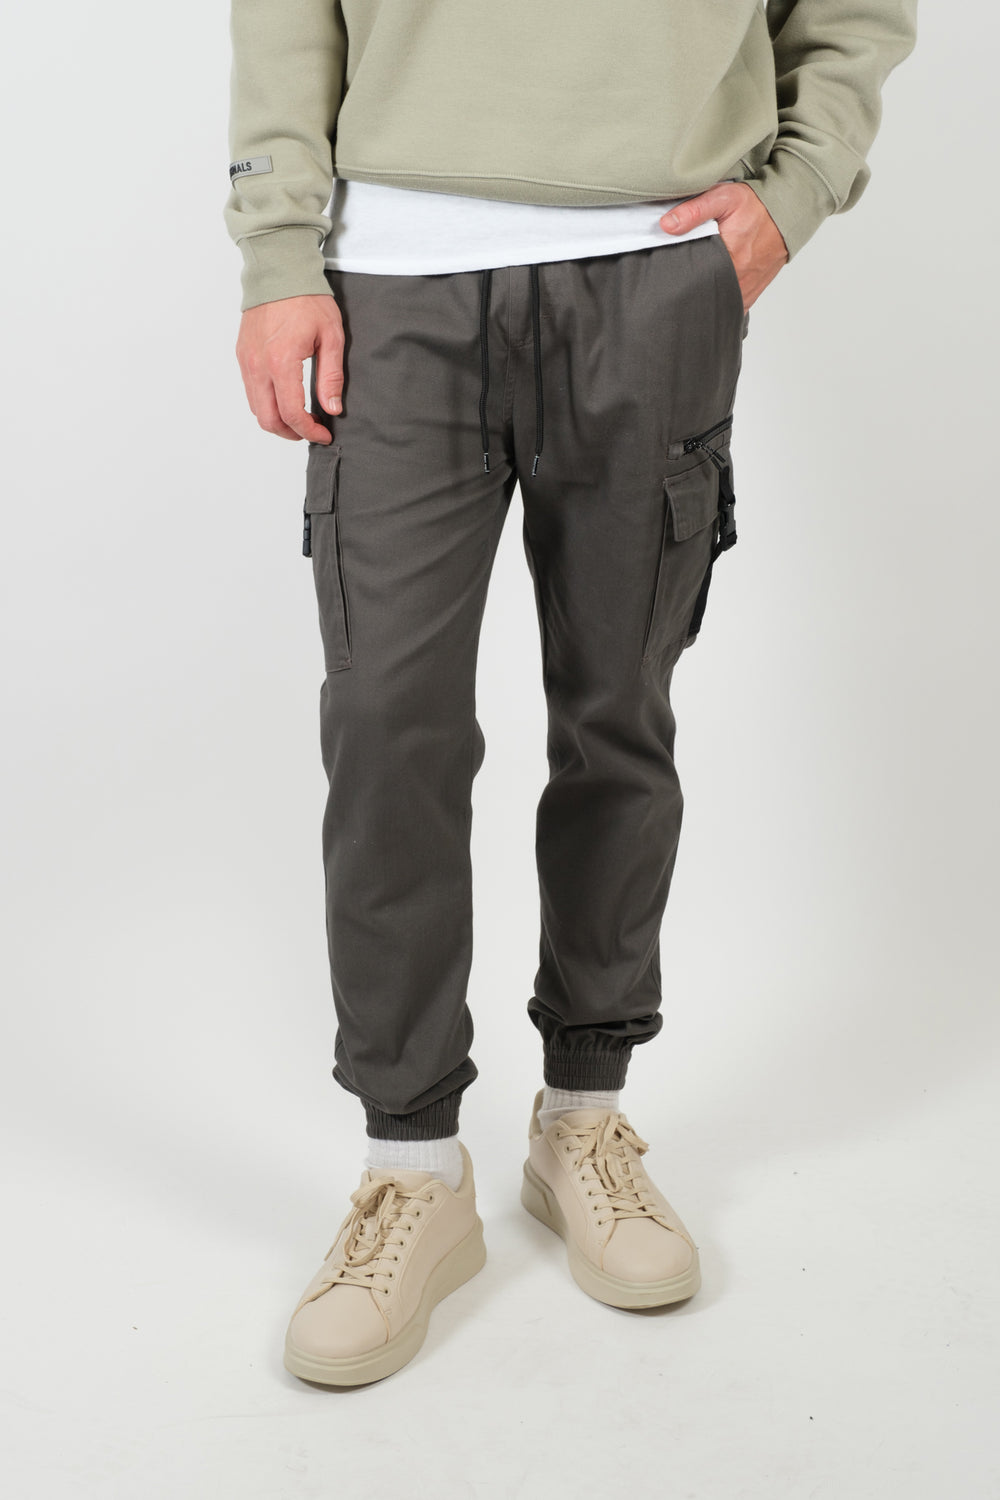 Men's Joggers | Knit, Ripstop, and Twill | Brooklyn Cloth